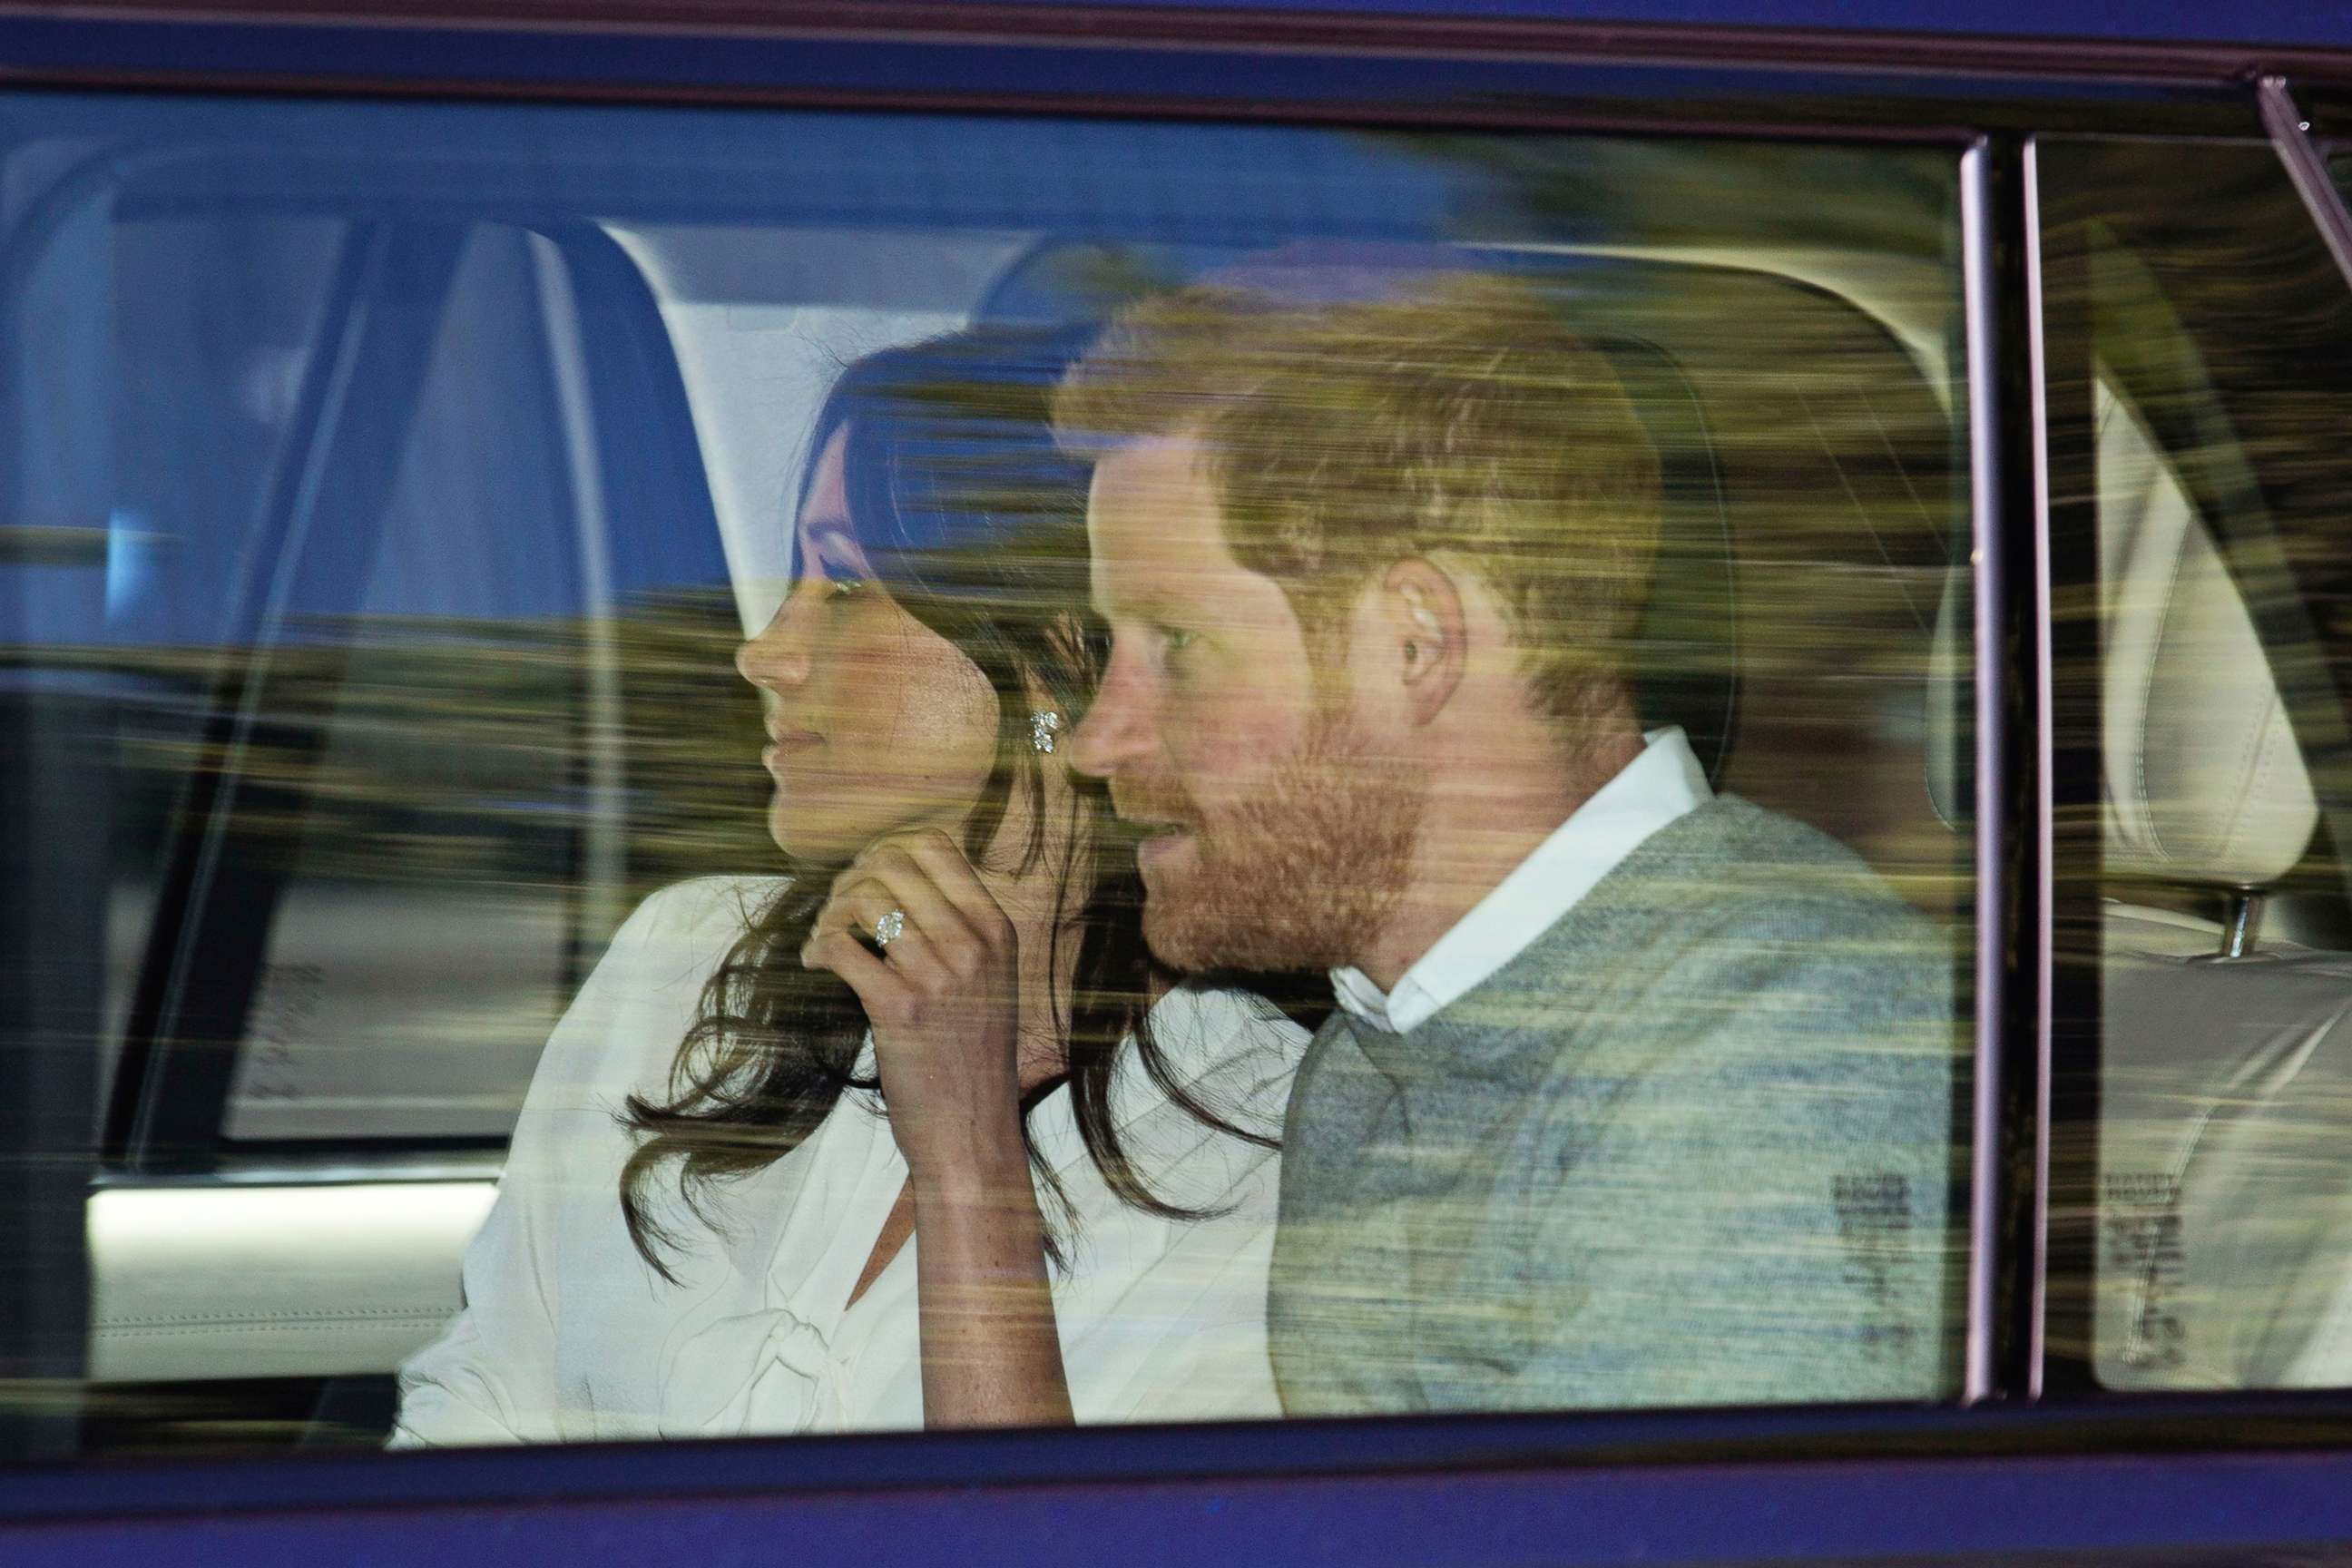 PHOTO: Meghan Markle and Prince Harry in London, May 17, 2018.